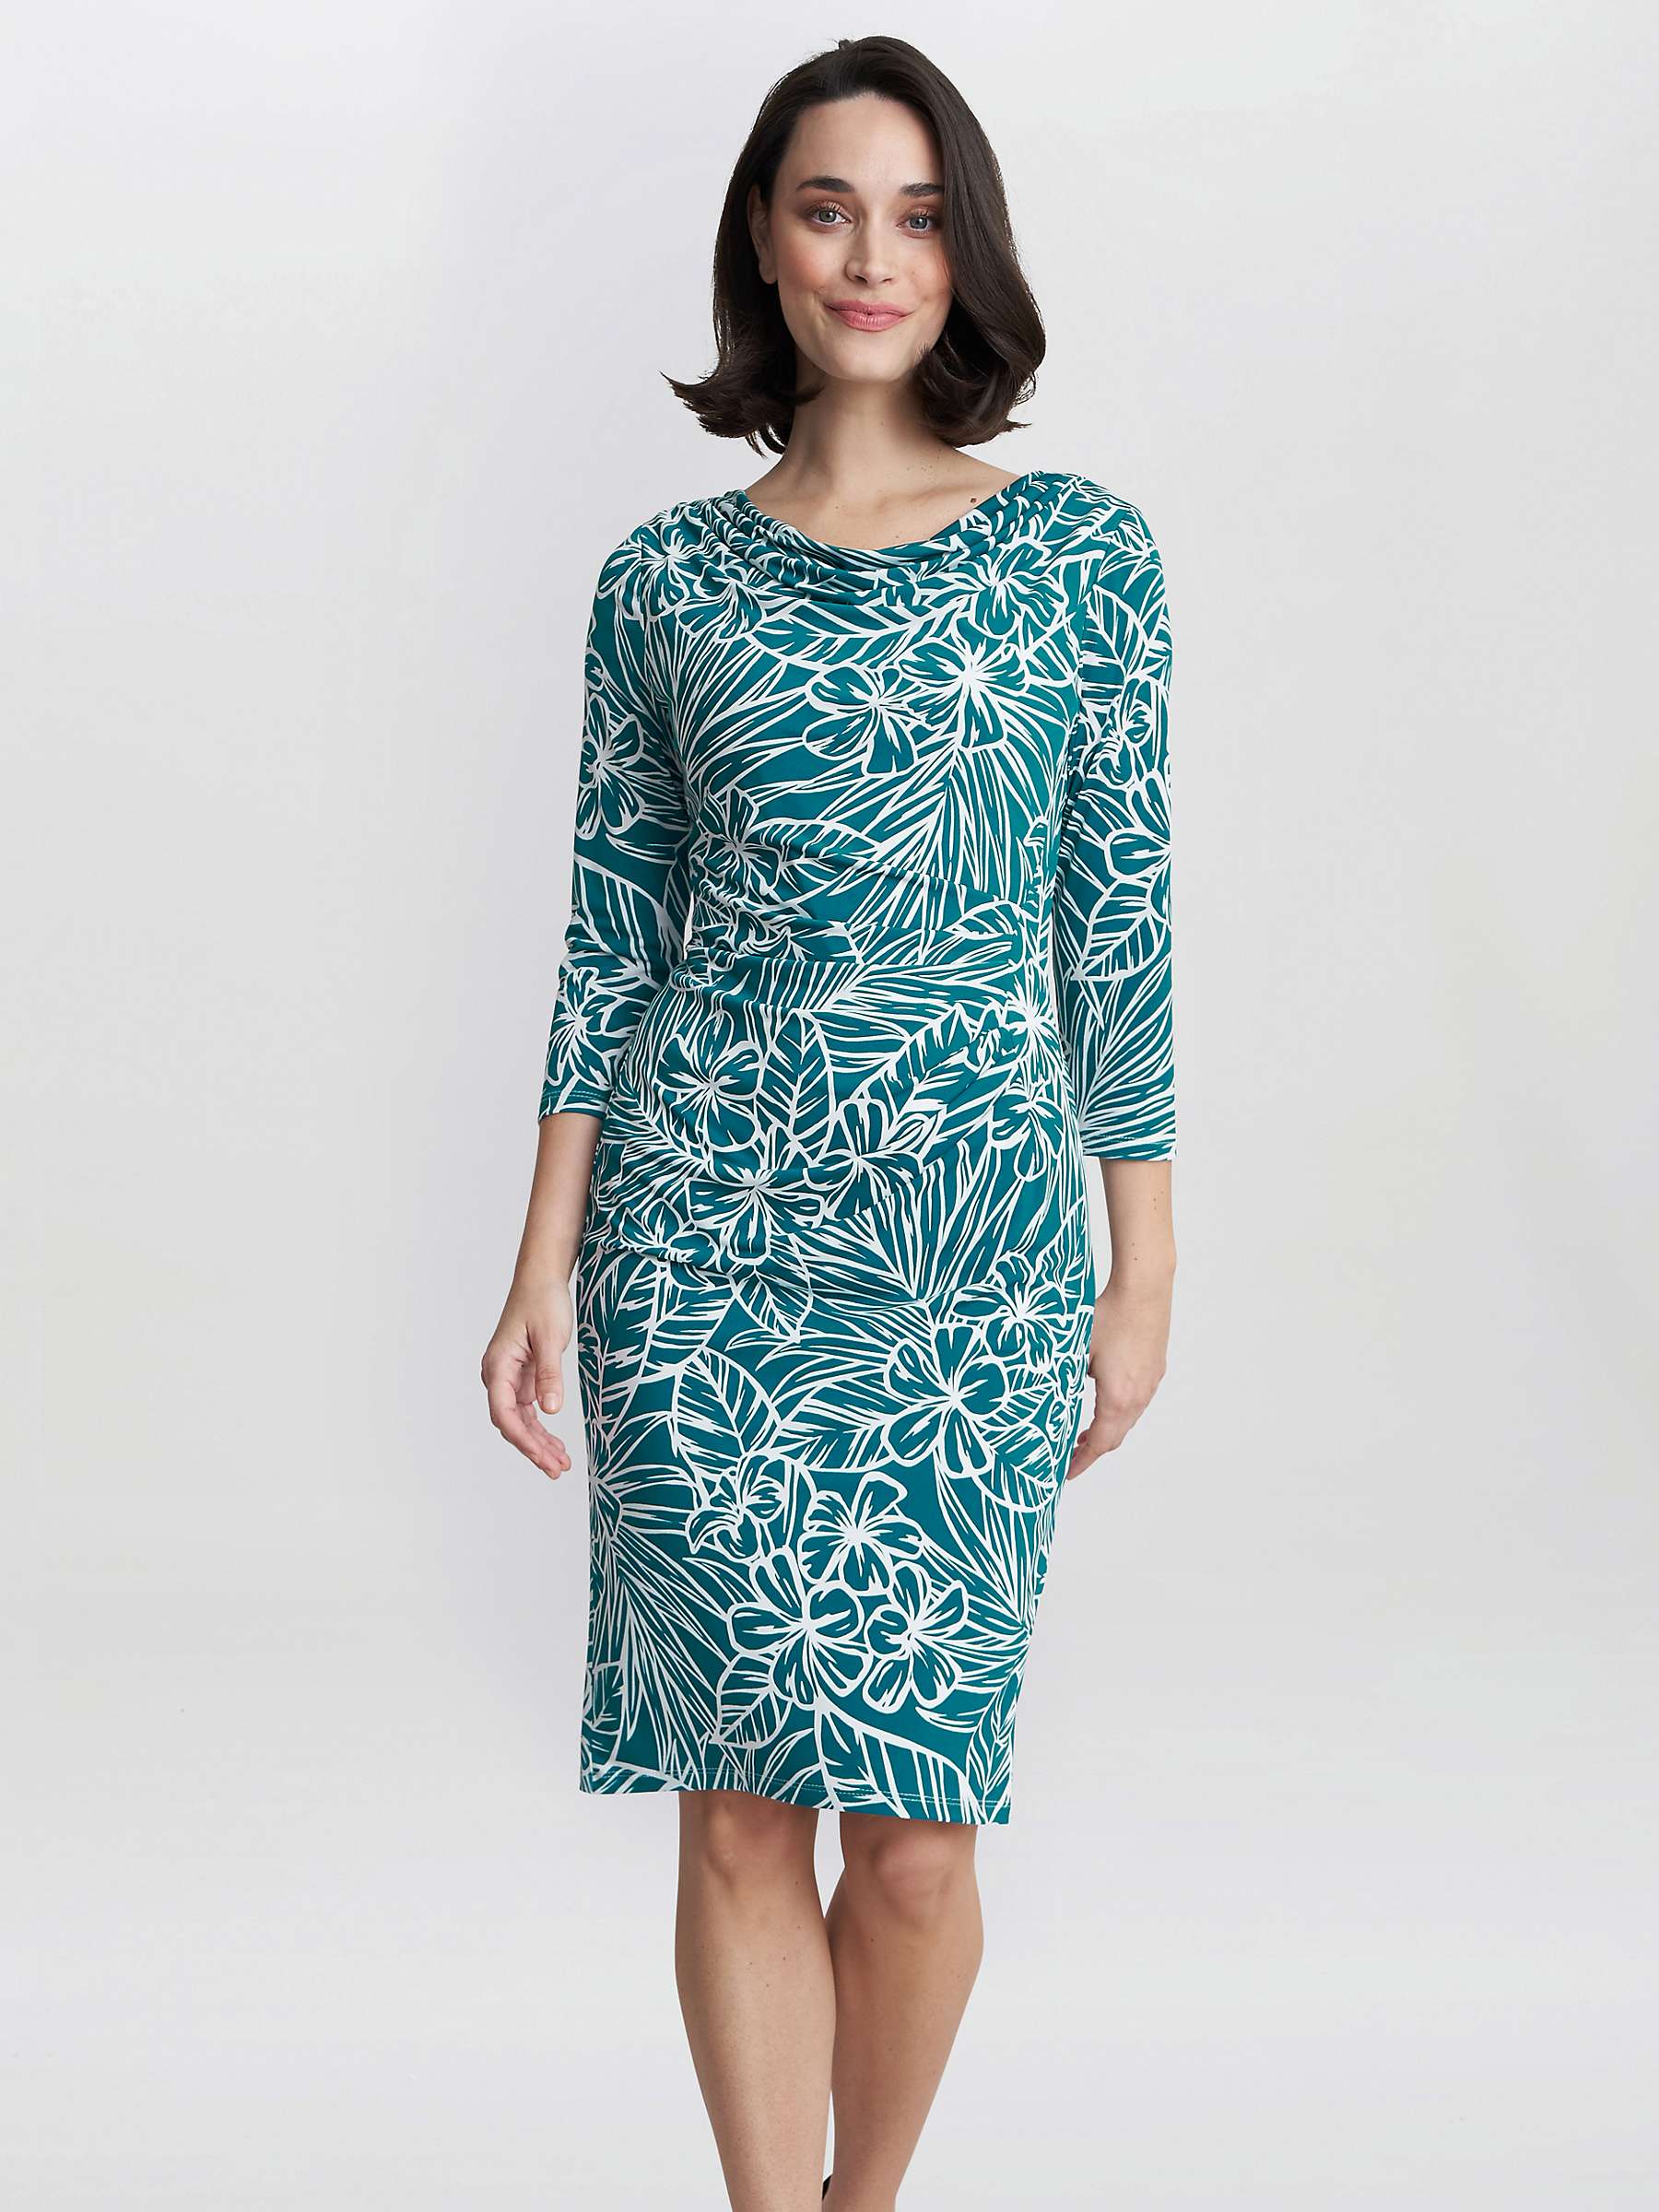 Buy Gina Bacconi Adeline Printed Jersey Cowl Neck Dress, Teal/White Online at johnlewis.com